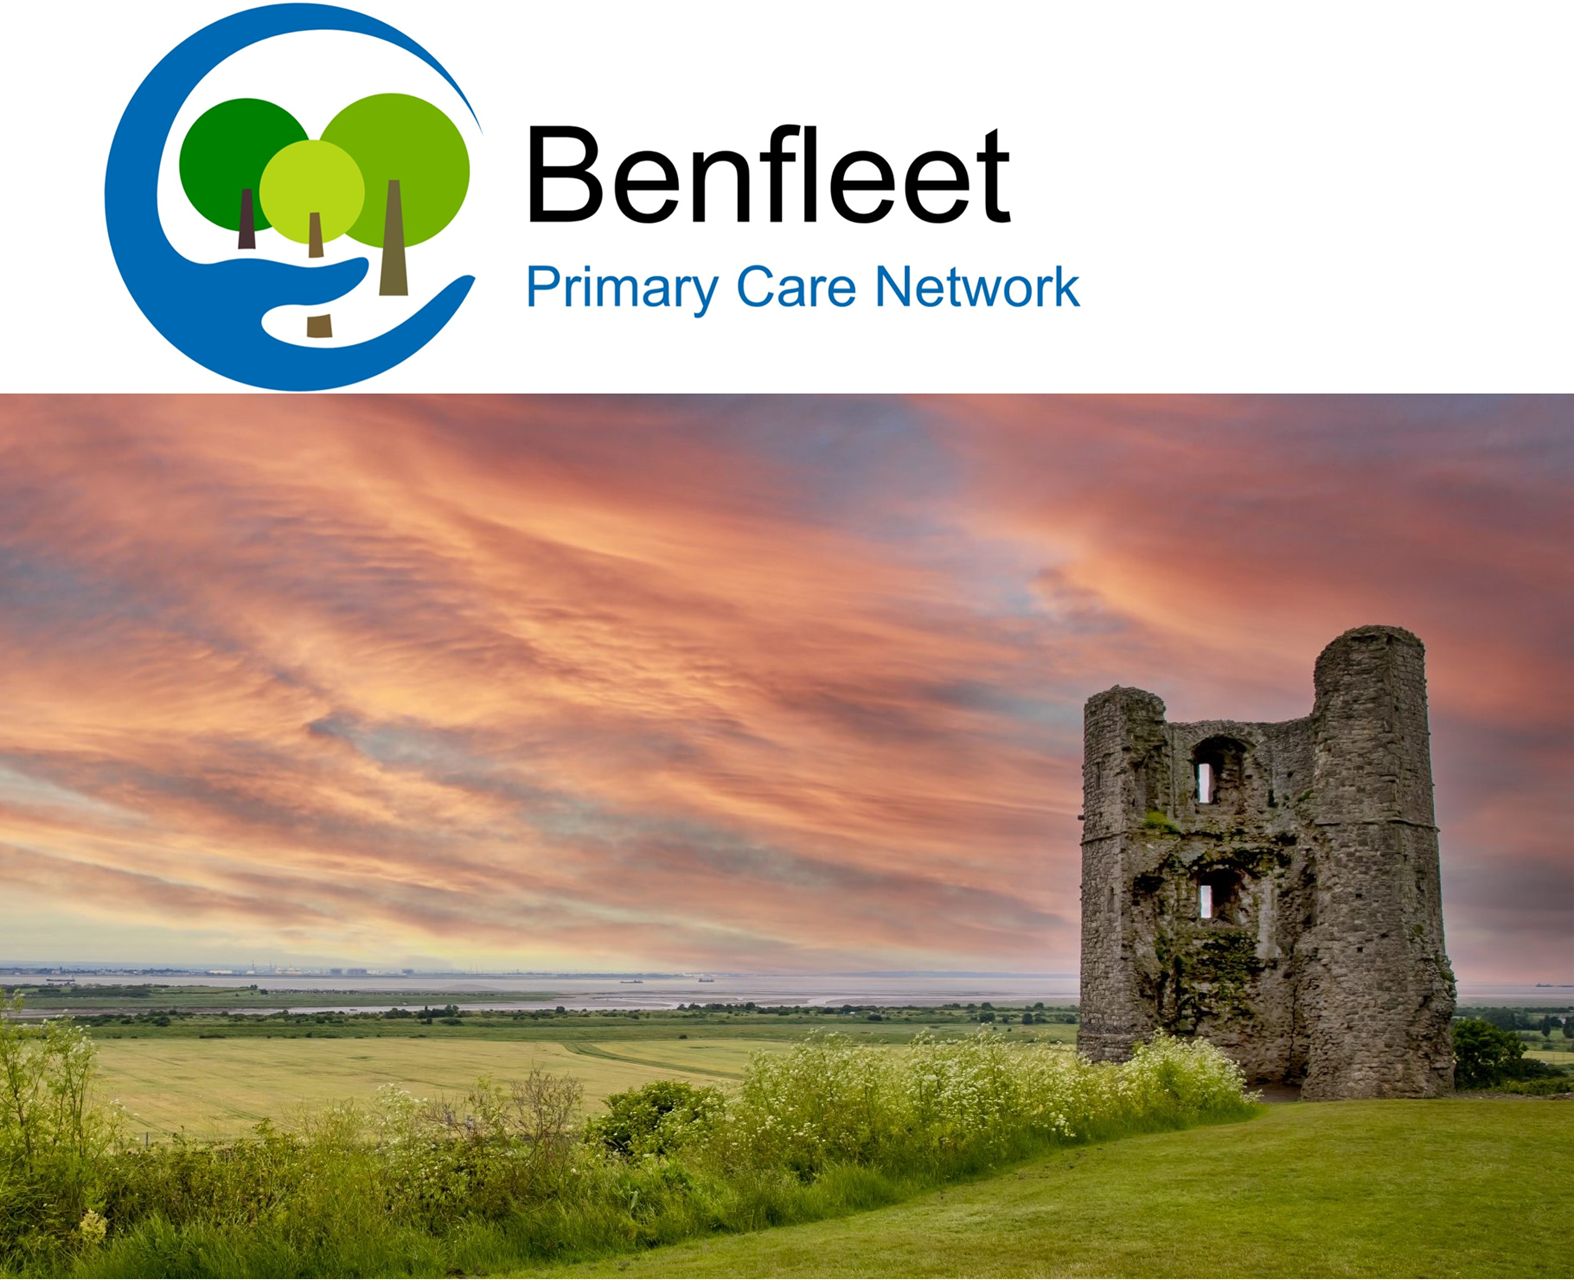 benfleet pcn logo and picture of hadleigh castle